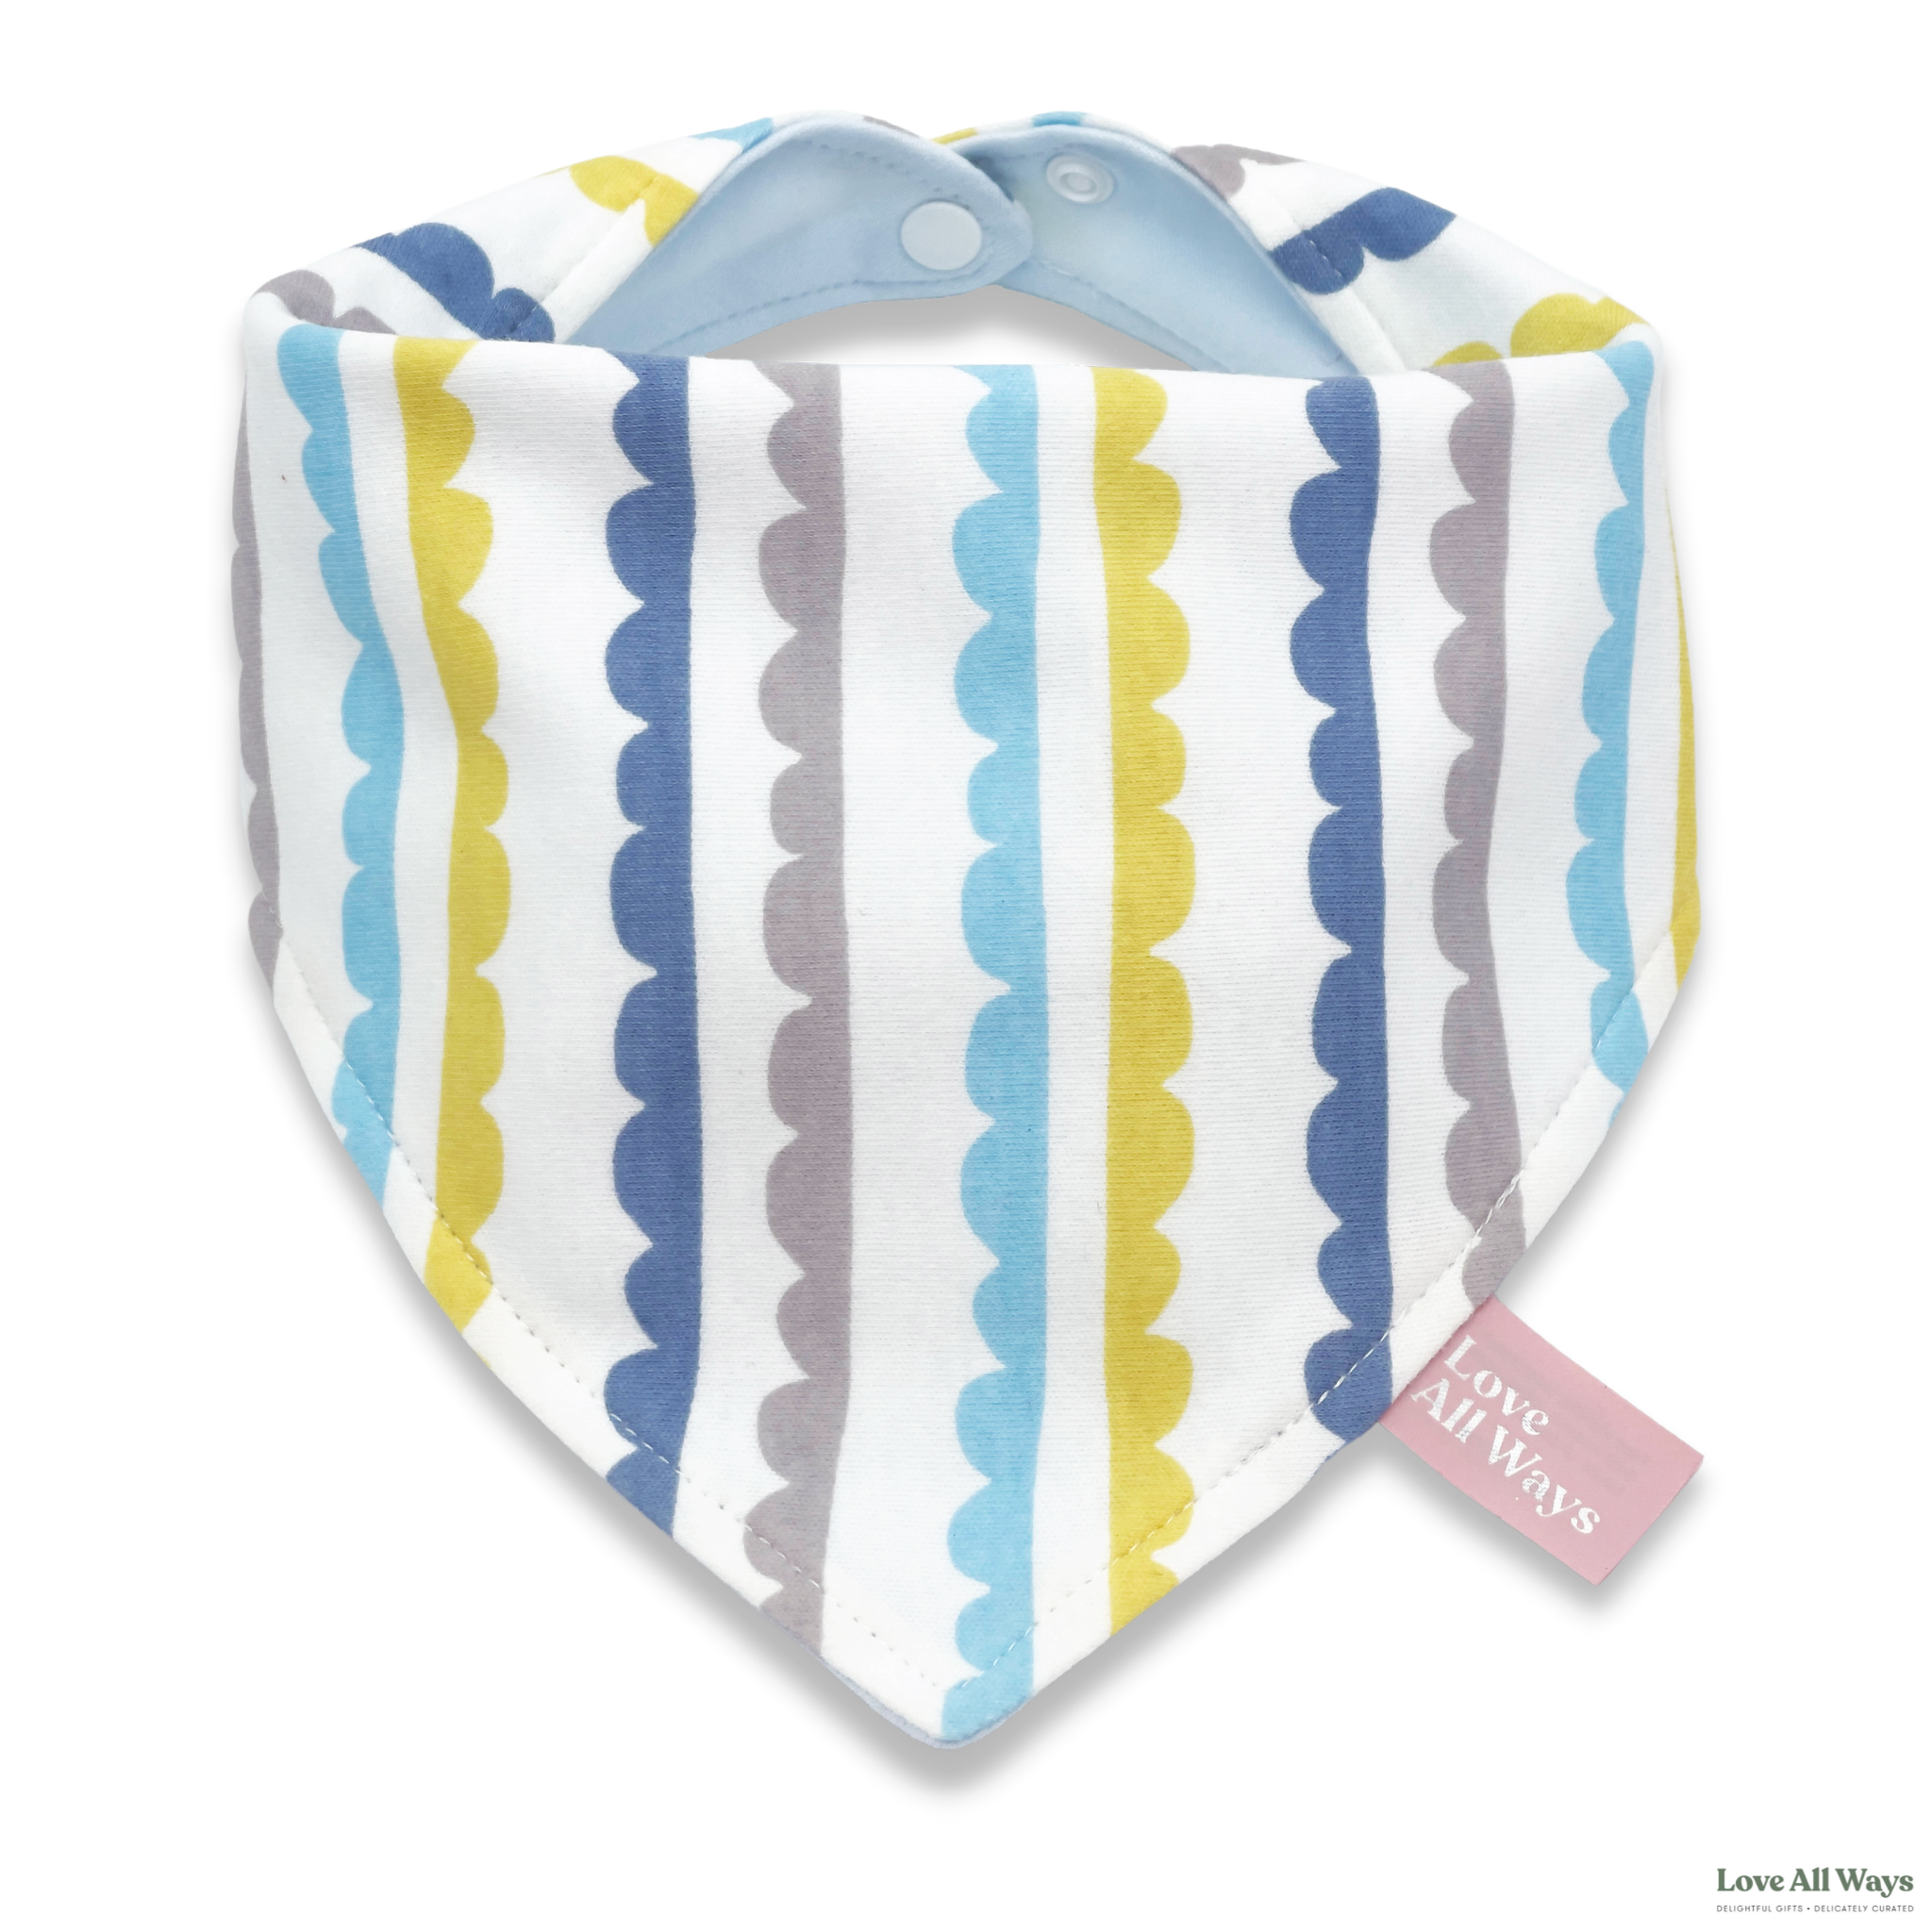 Love All Ways 100% Cotton Bandana Bib - Featuring Blue Stripes with added turquoise, yellow and grey colours.